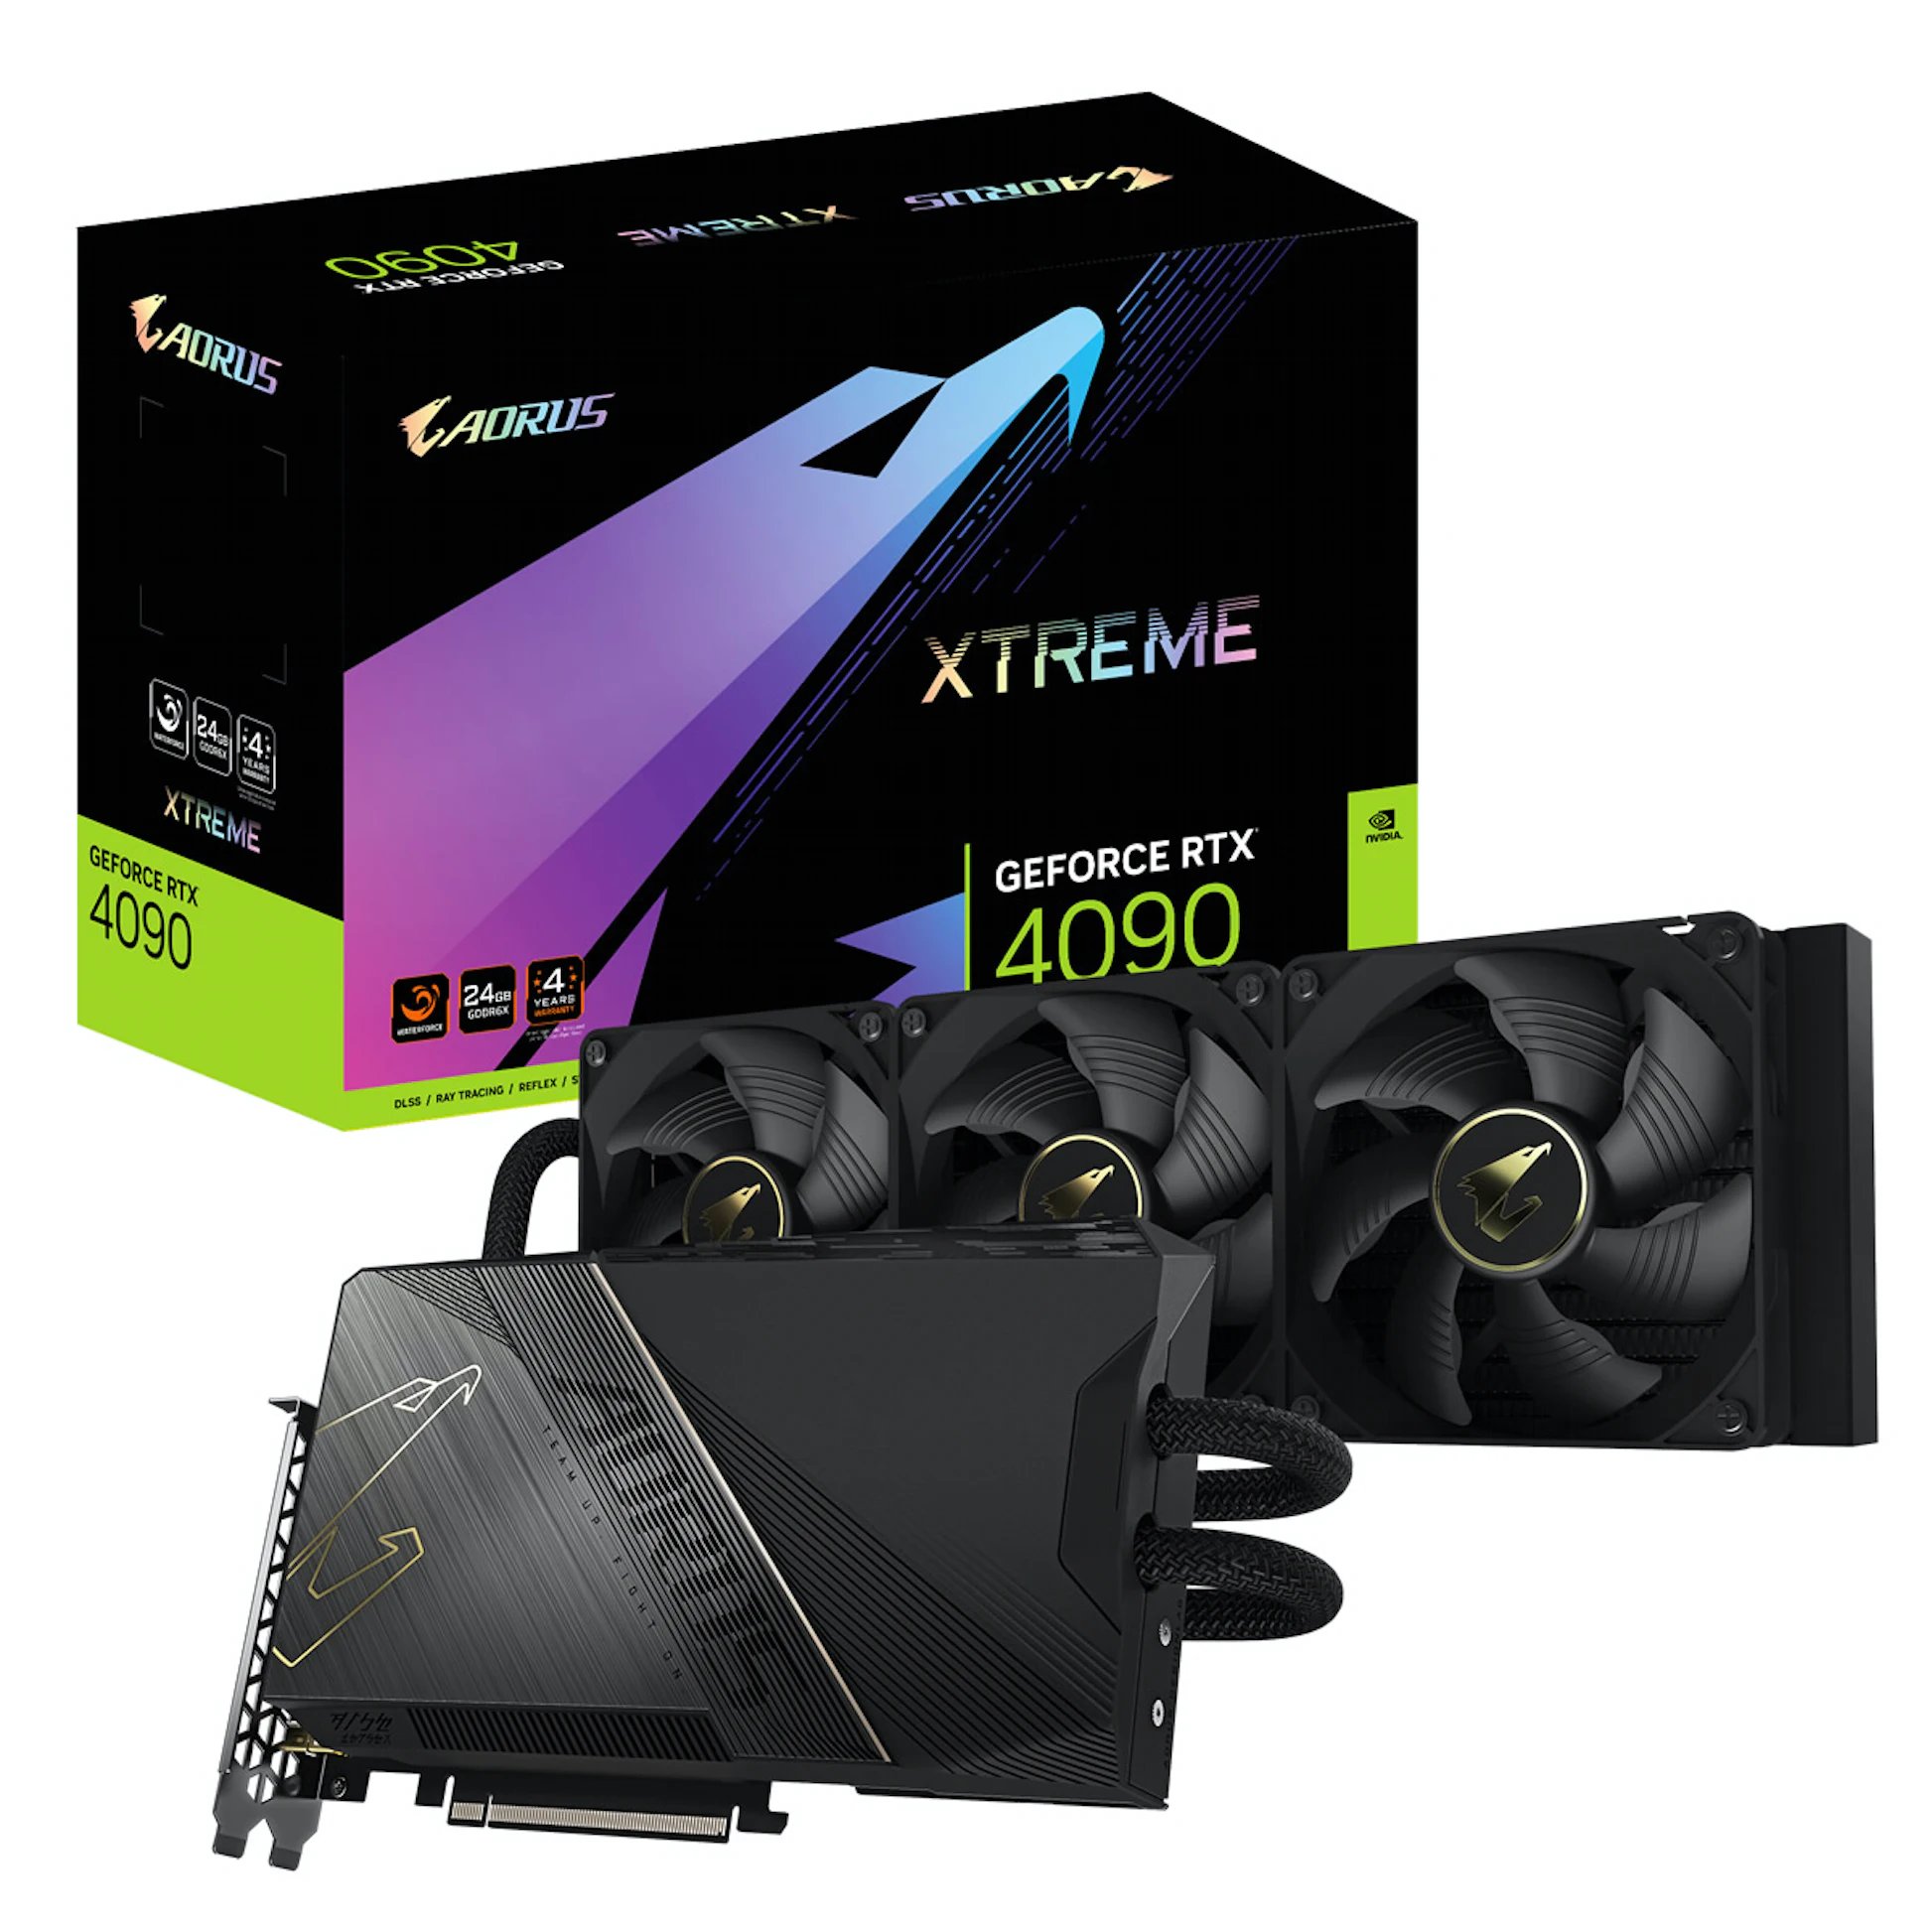 Media asset in full size related to 3dfxzone.it news item entitled as follows: Render della AORUS GeForce RTX 4090 XTREME WaterForce di GIGABYTE | Image Name: news33723_GeForce-RTX-4090-XTREME-WaterForce_1.jpg